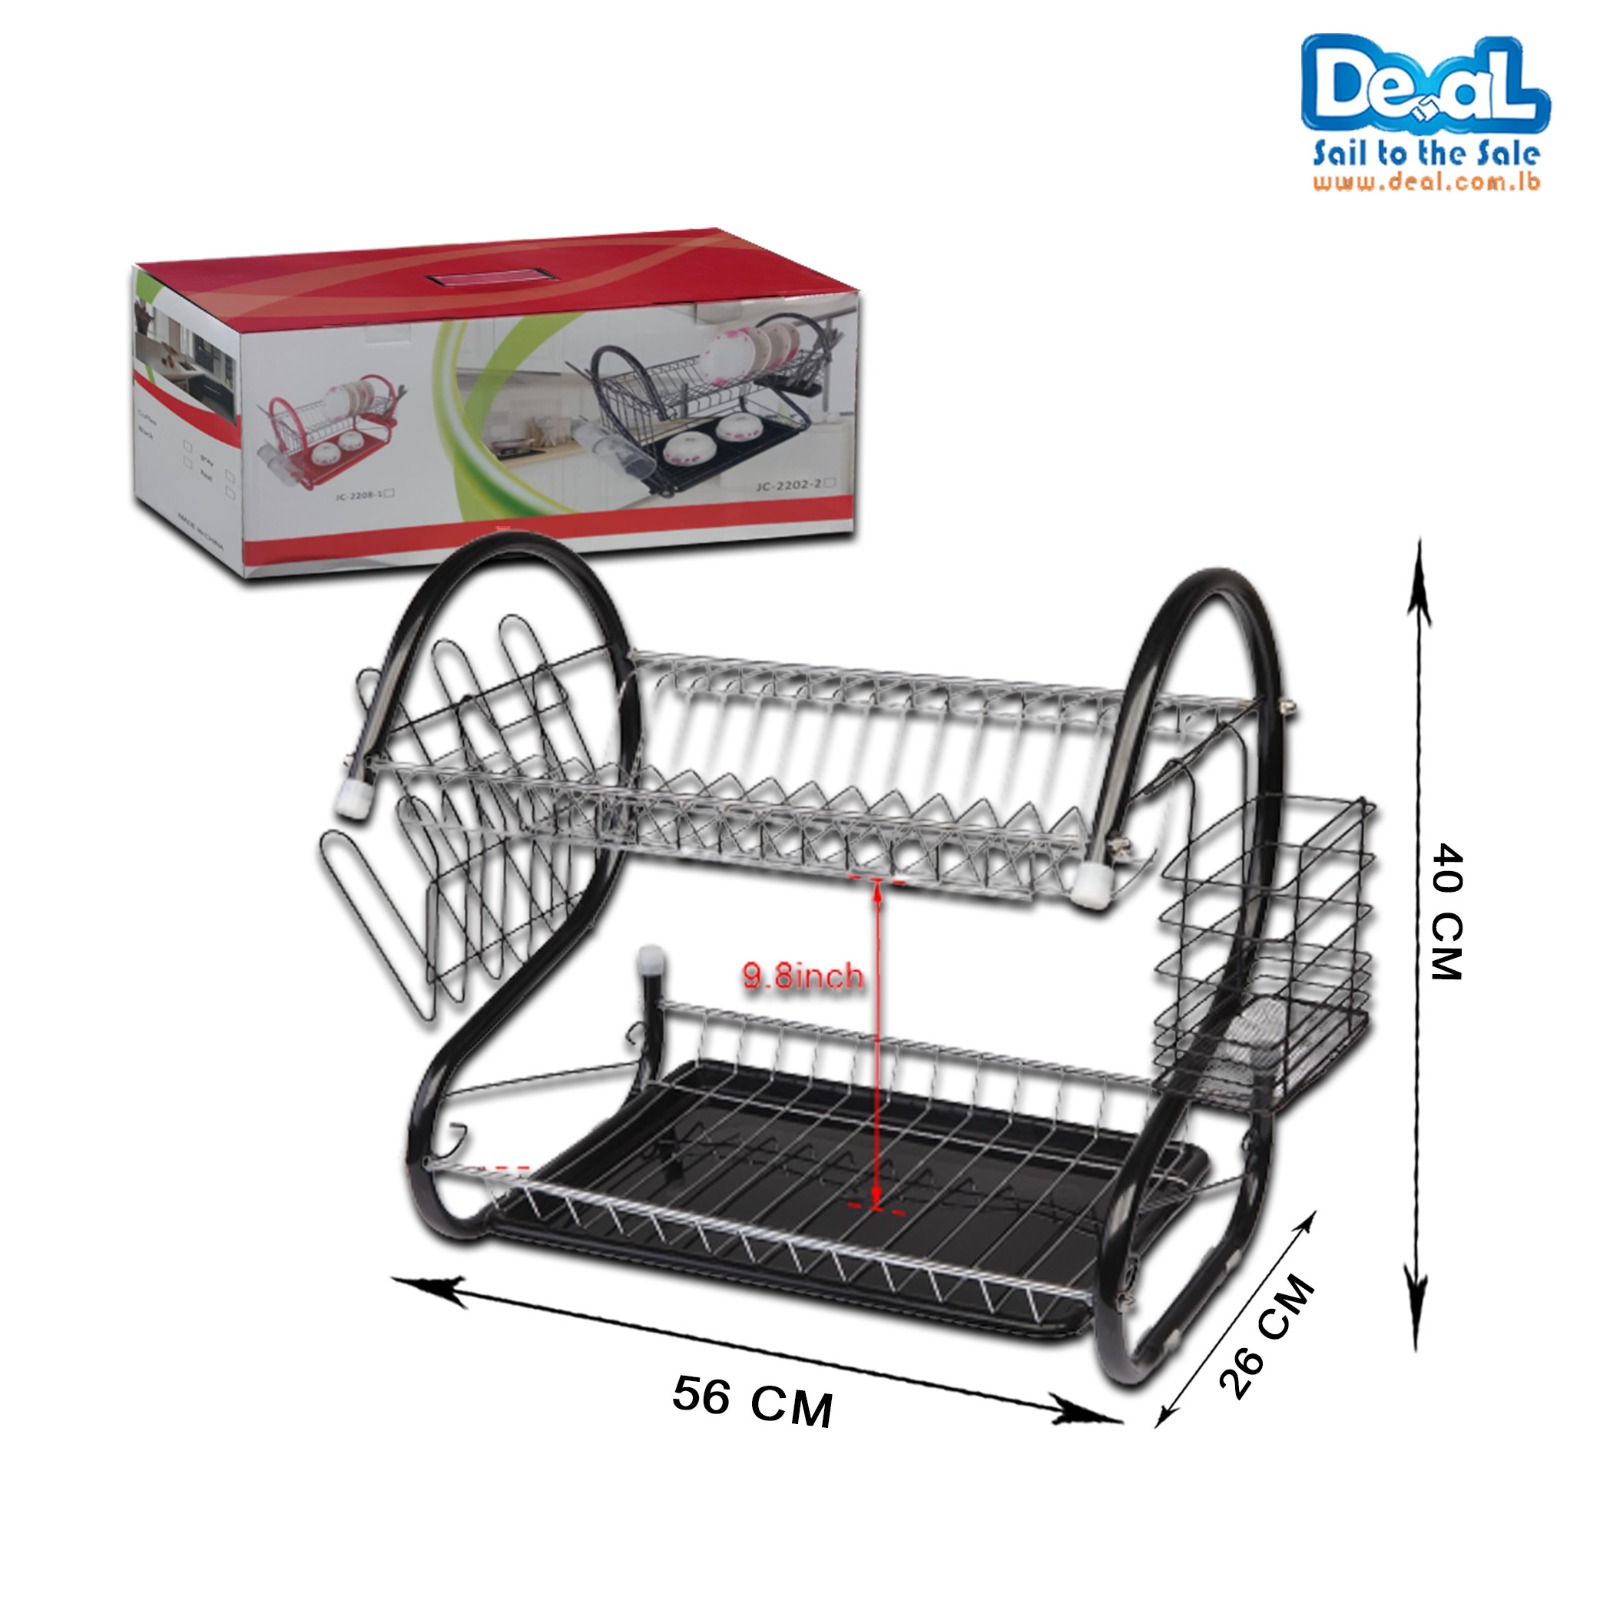 2 Tier Dish Drying Rack Granite Engraving Stainless Steel with Drain Board size 56*26*40cm